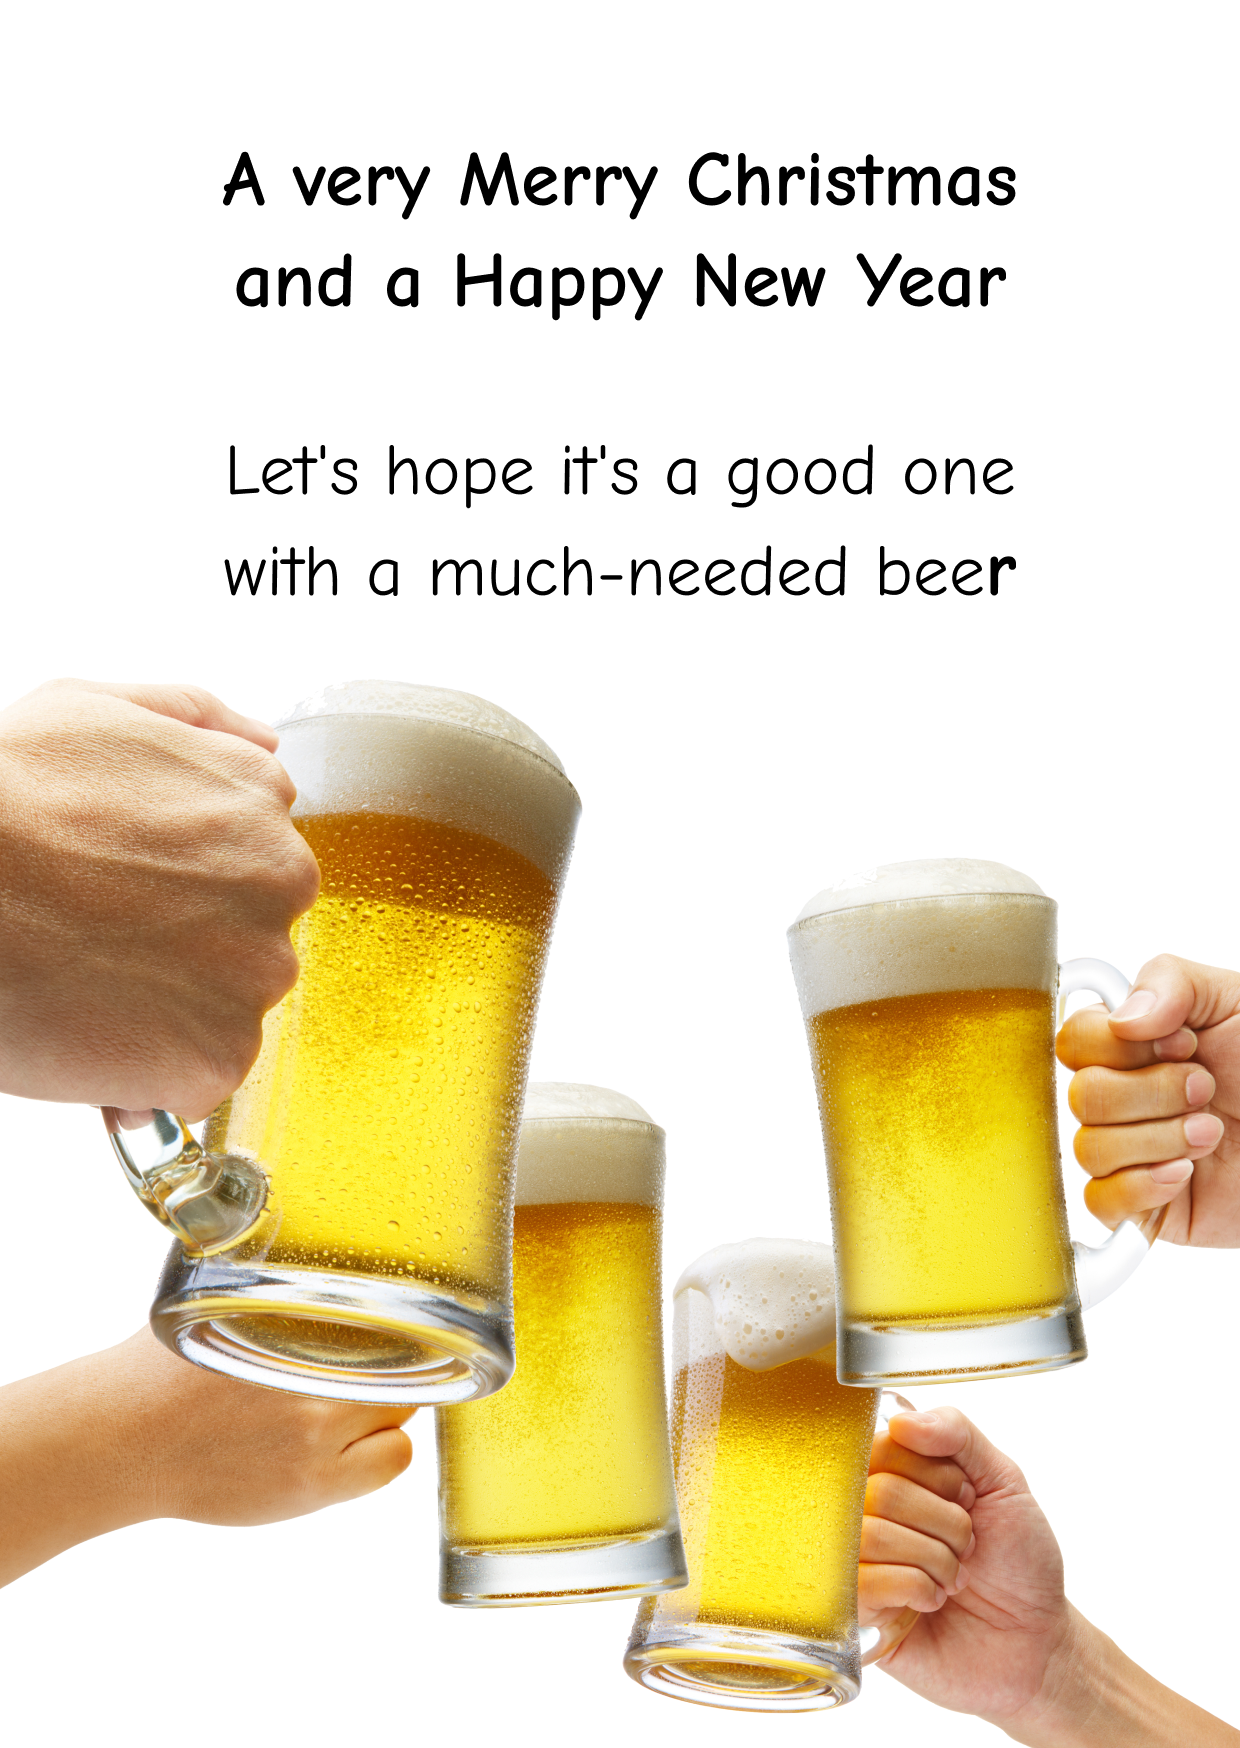 hope its a good one with a much needed beer postcard